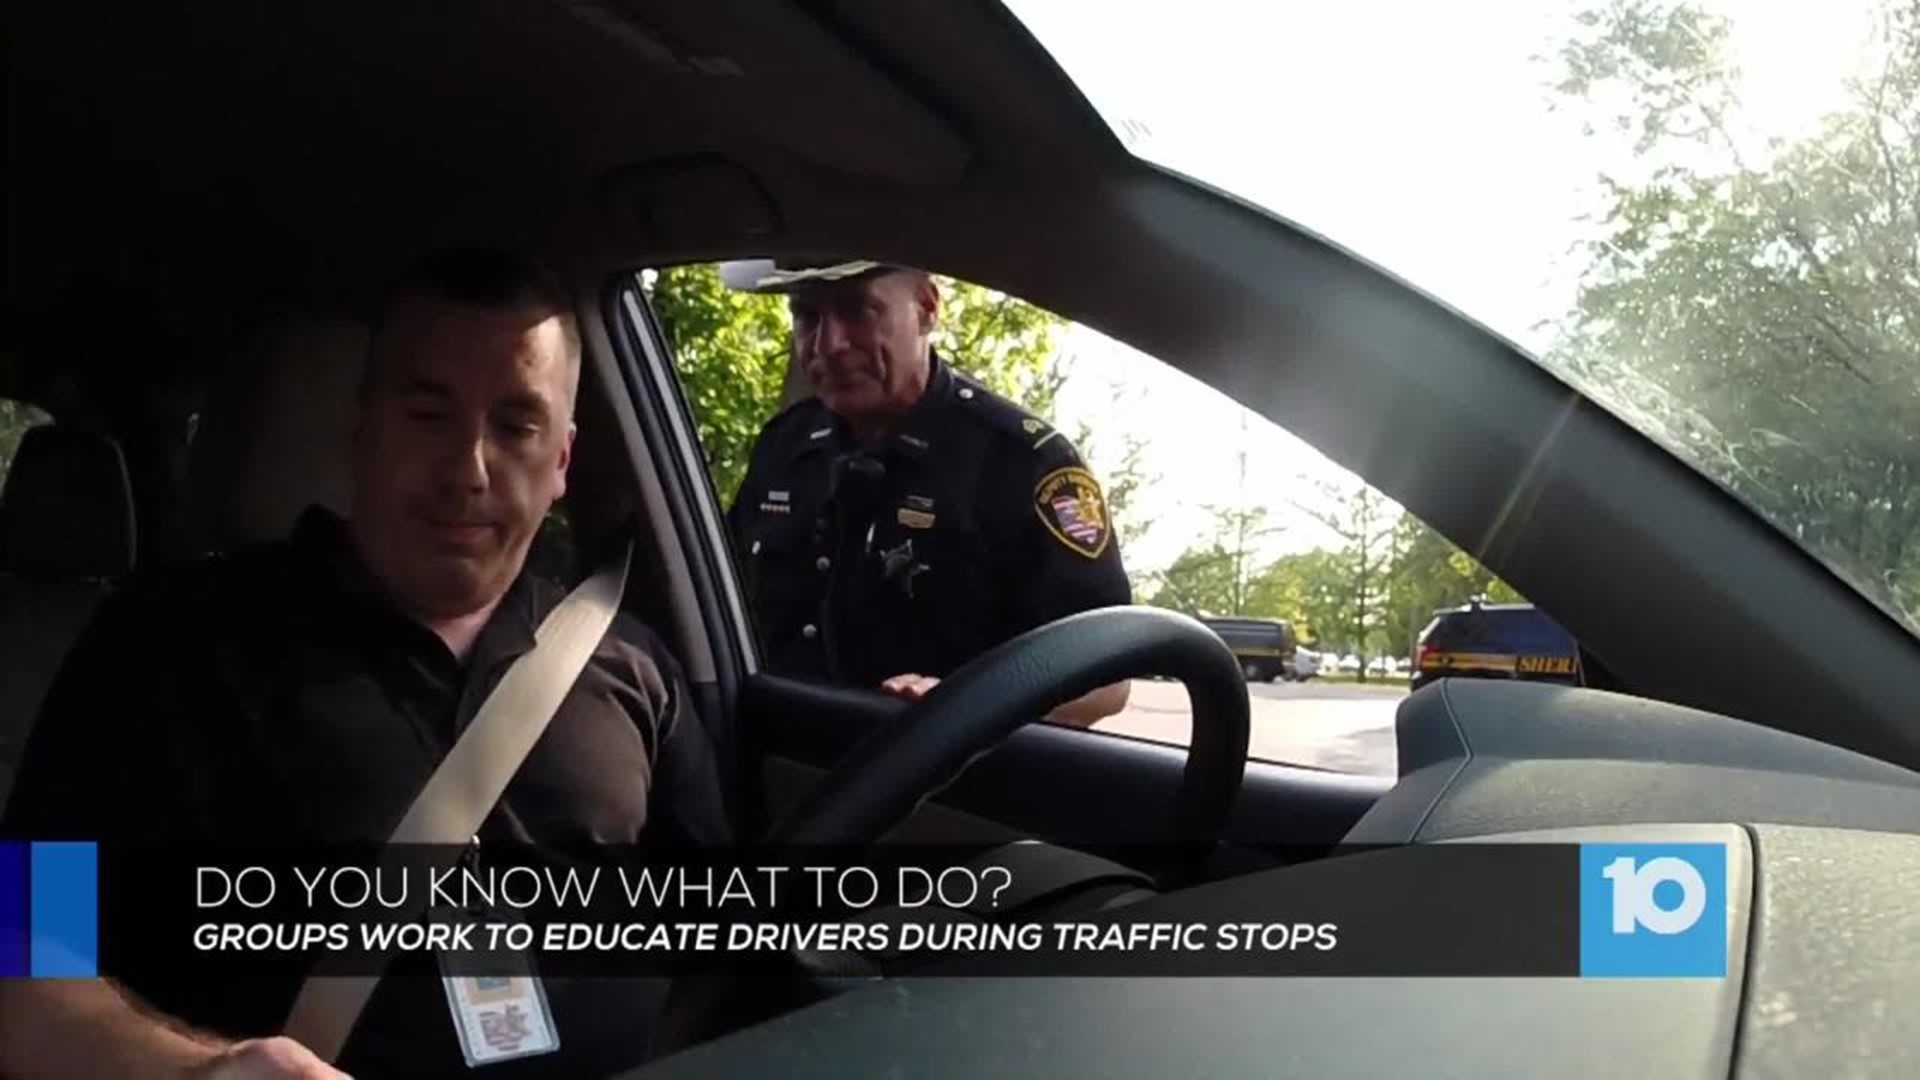 Organization looks to educate drivers pulled over by police.